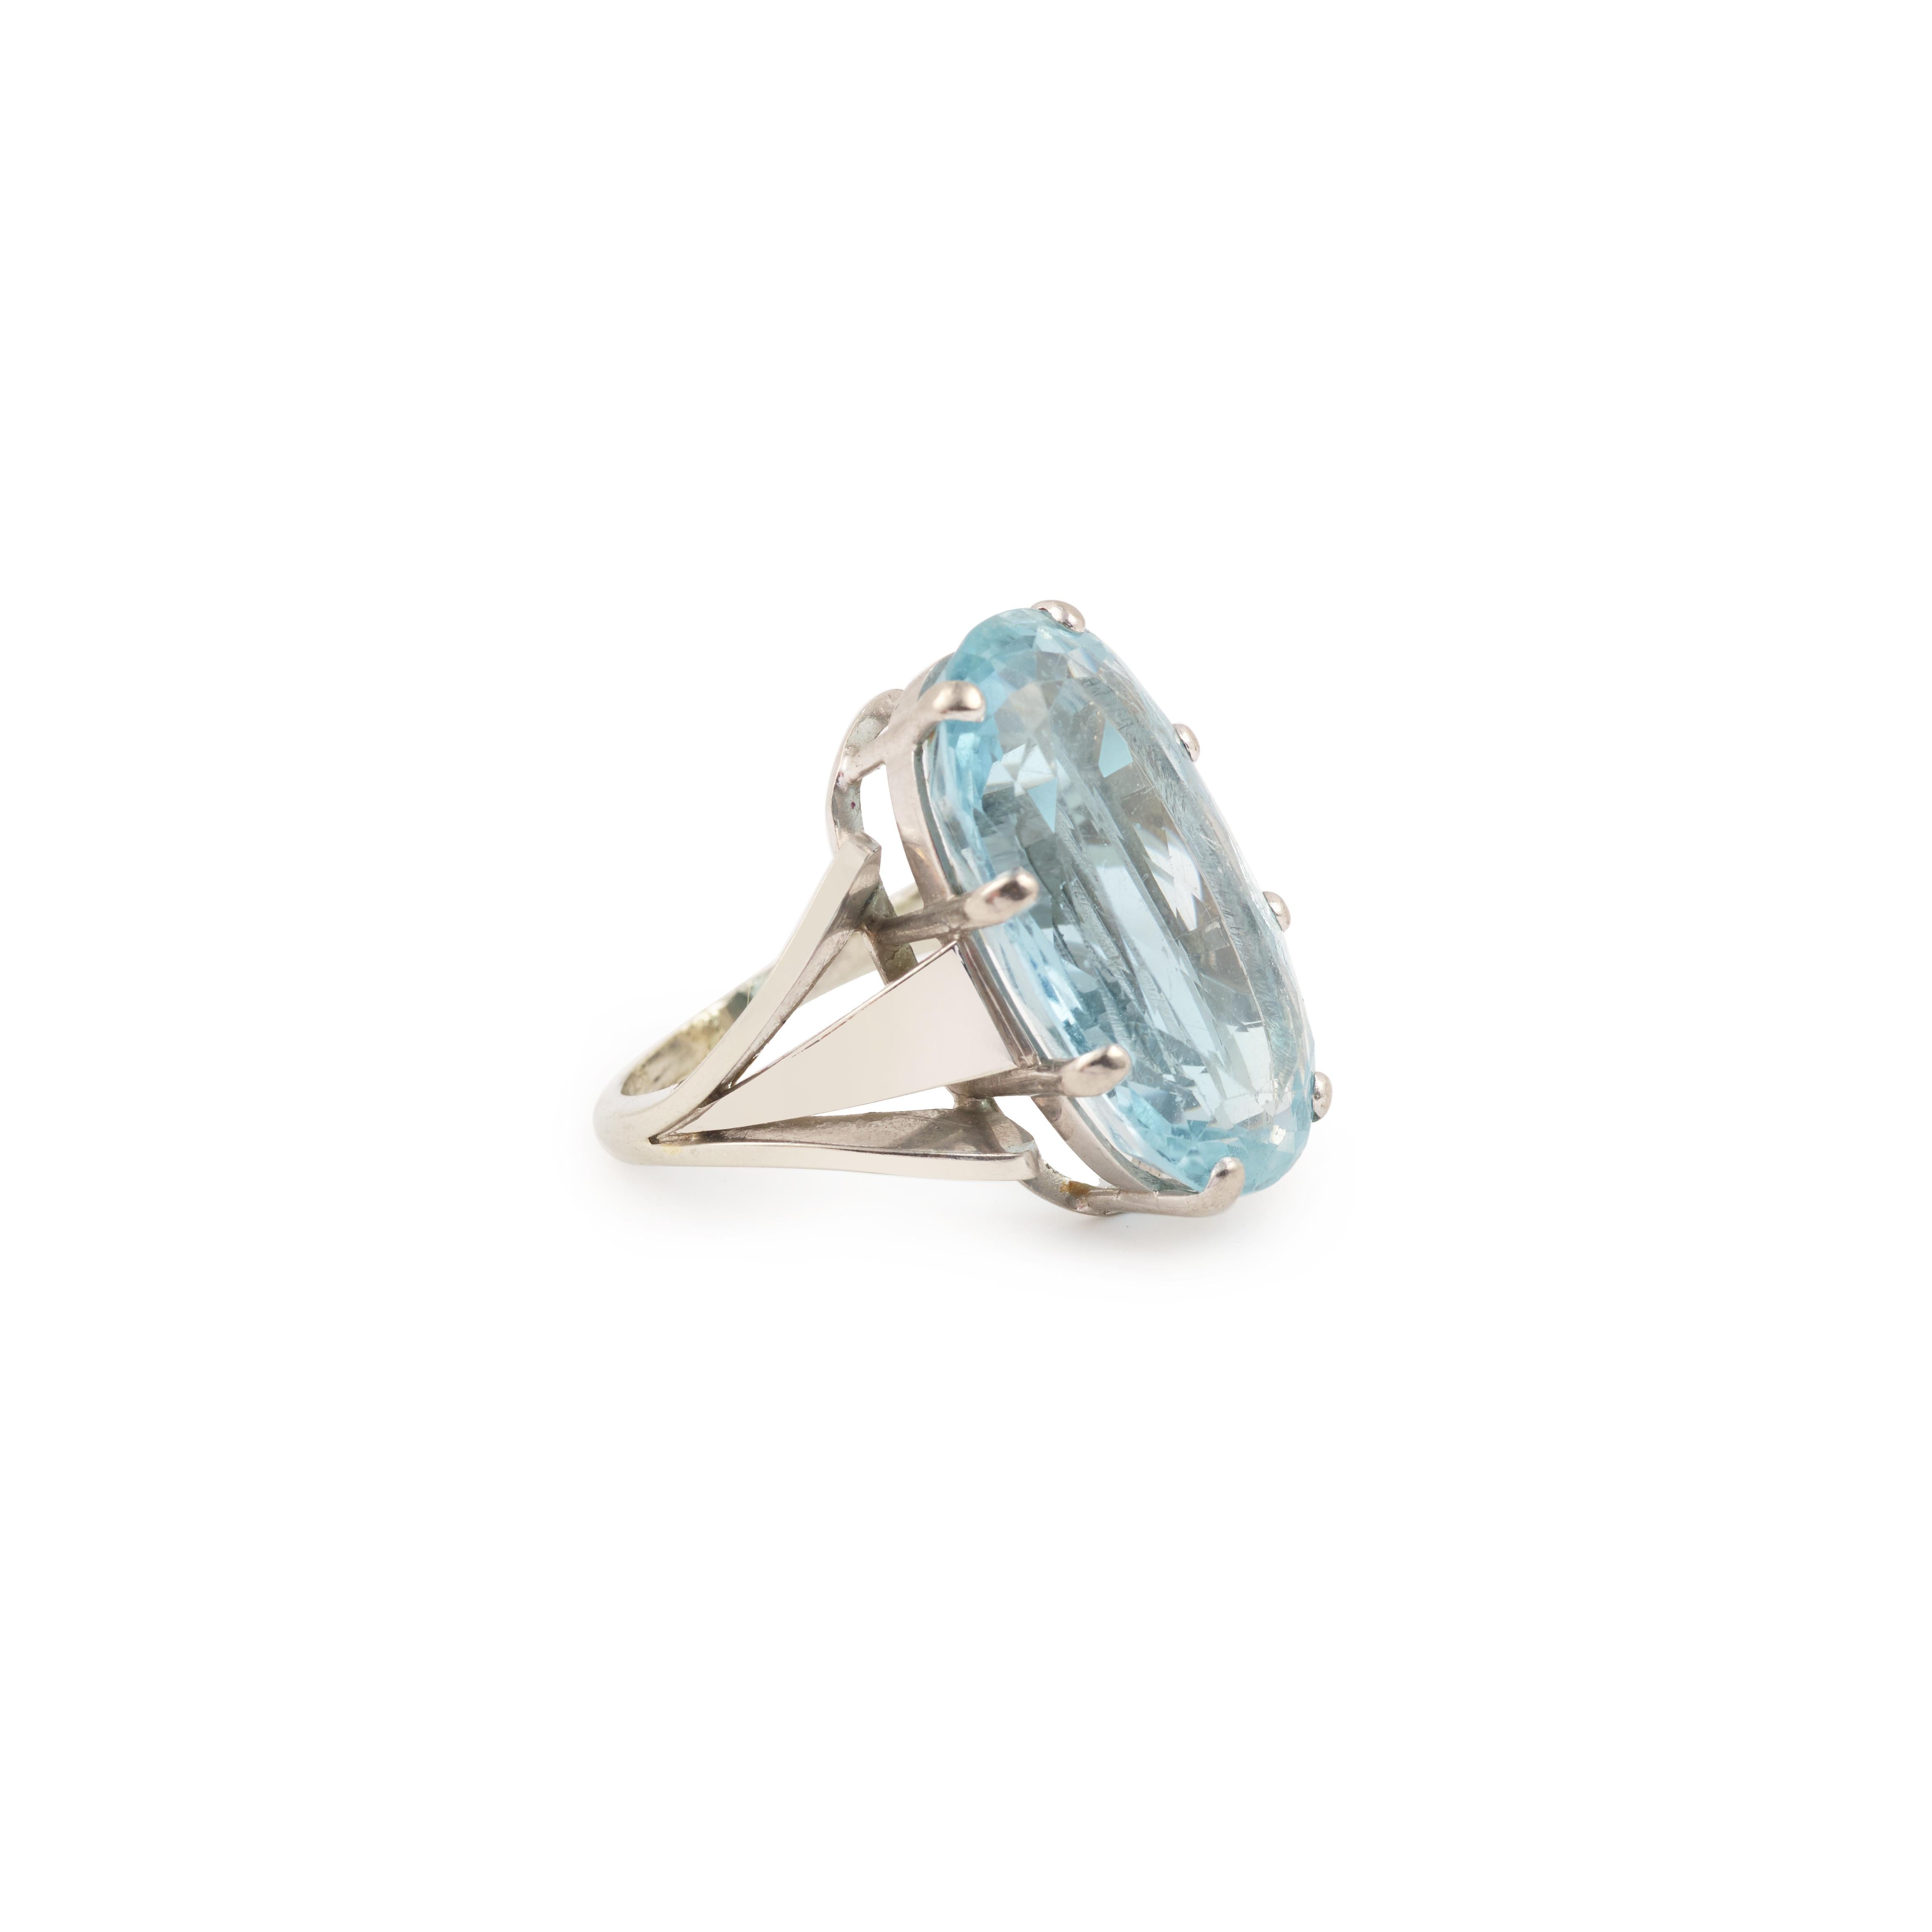 White gold ring set with an impressive oval blue topaz.

Scratches on the table of the gem

Weight of the topaz: 14.77 carats

Finger size : 49 (US size : 4.5)

14 karat white gold, 585/1000 (scallop shell hallmark)